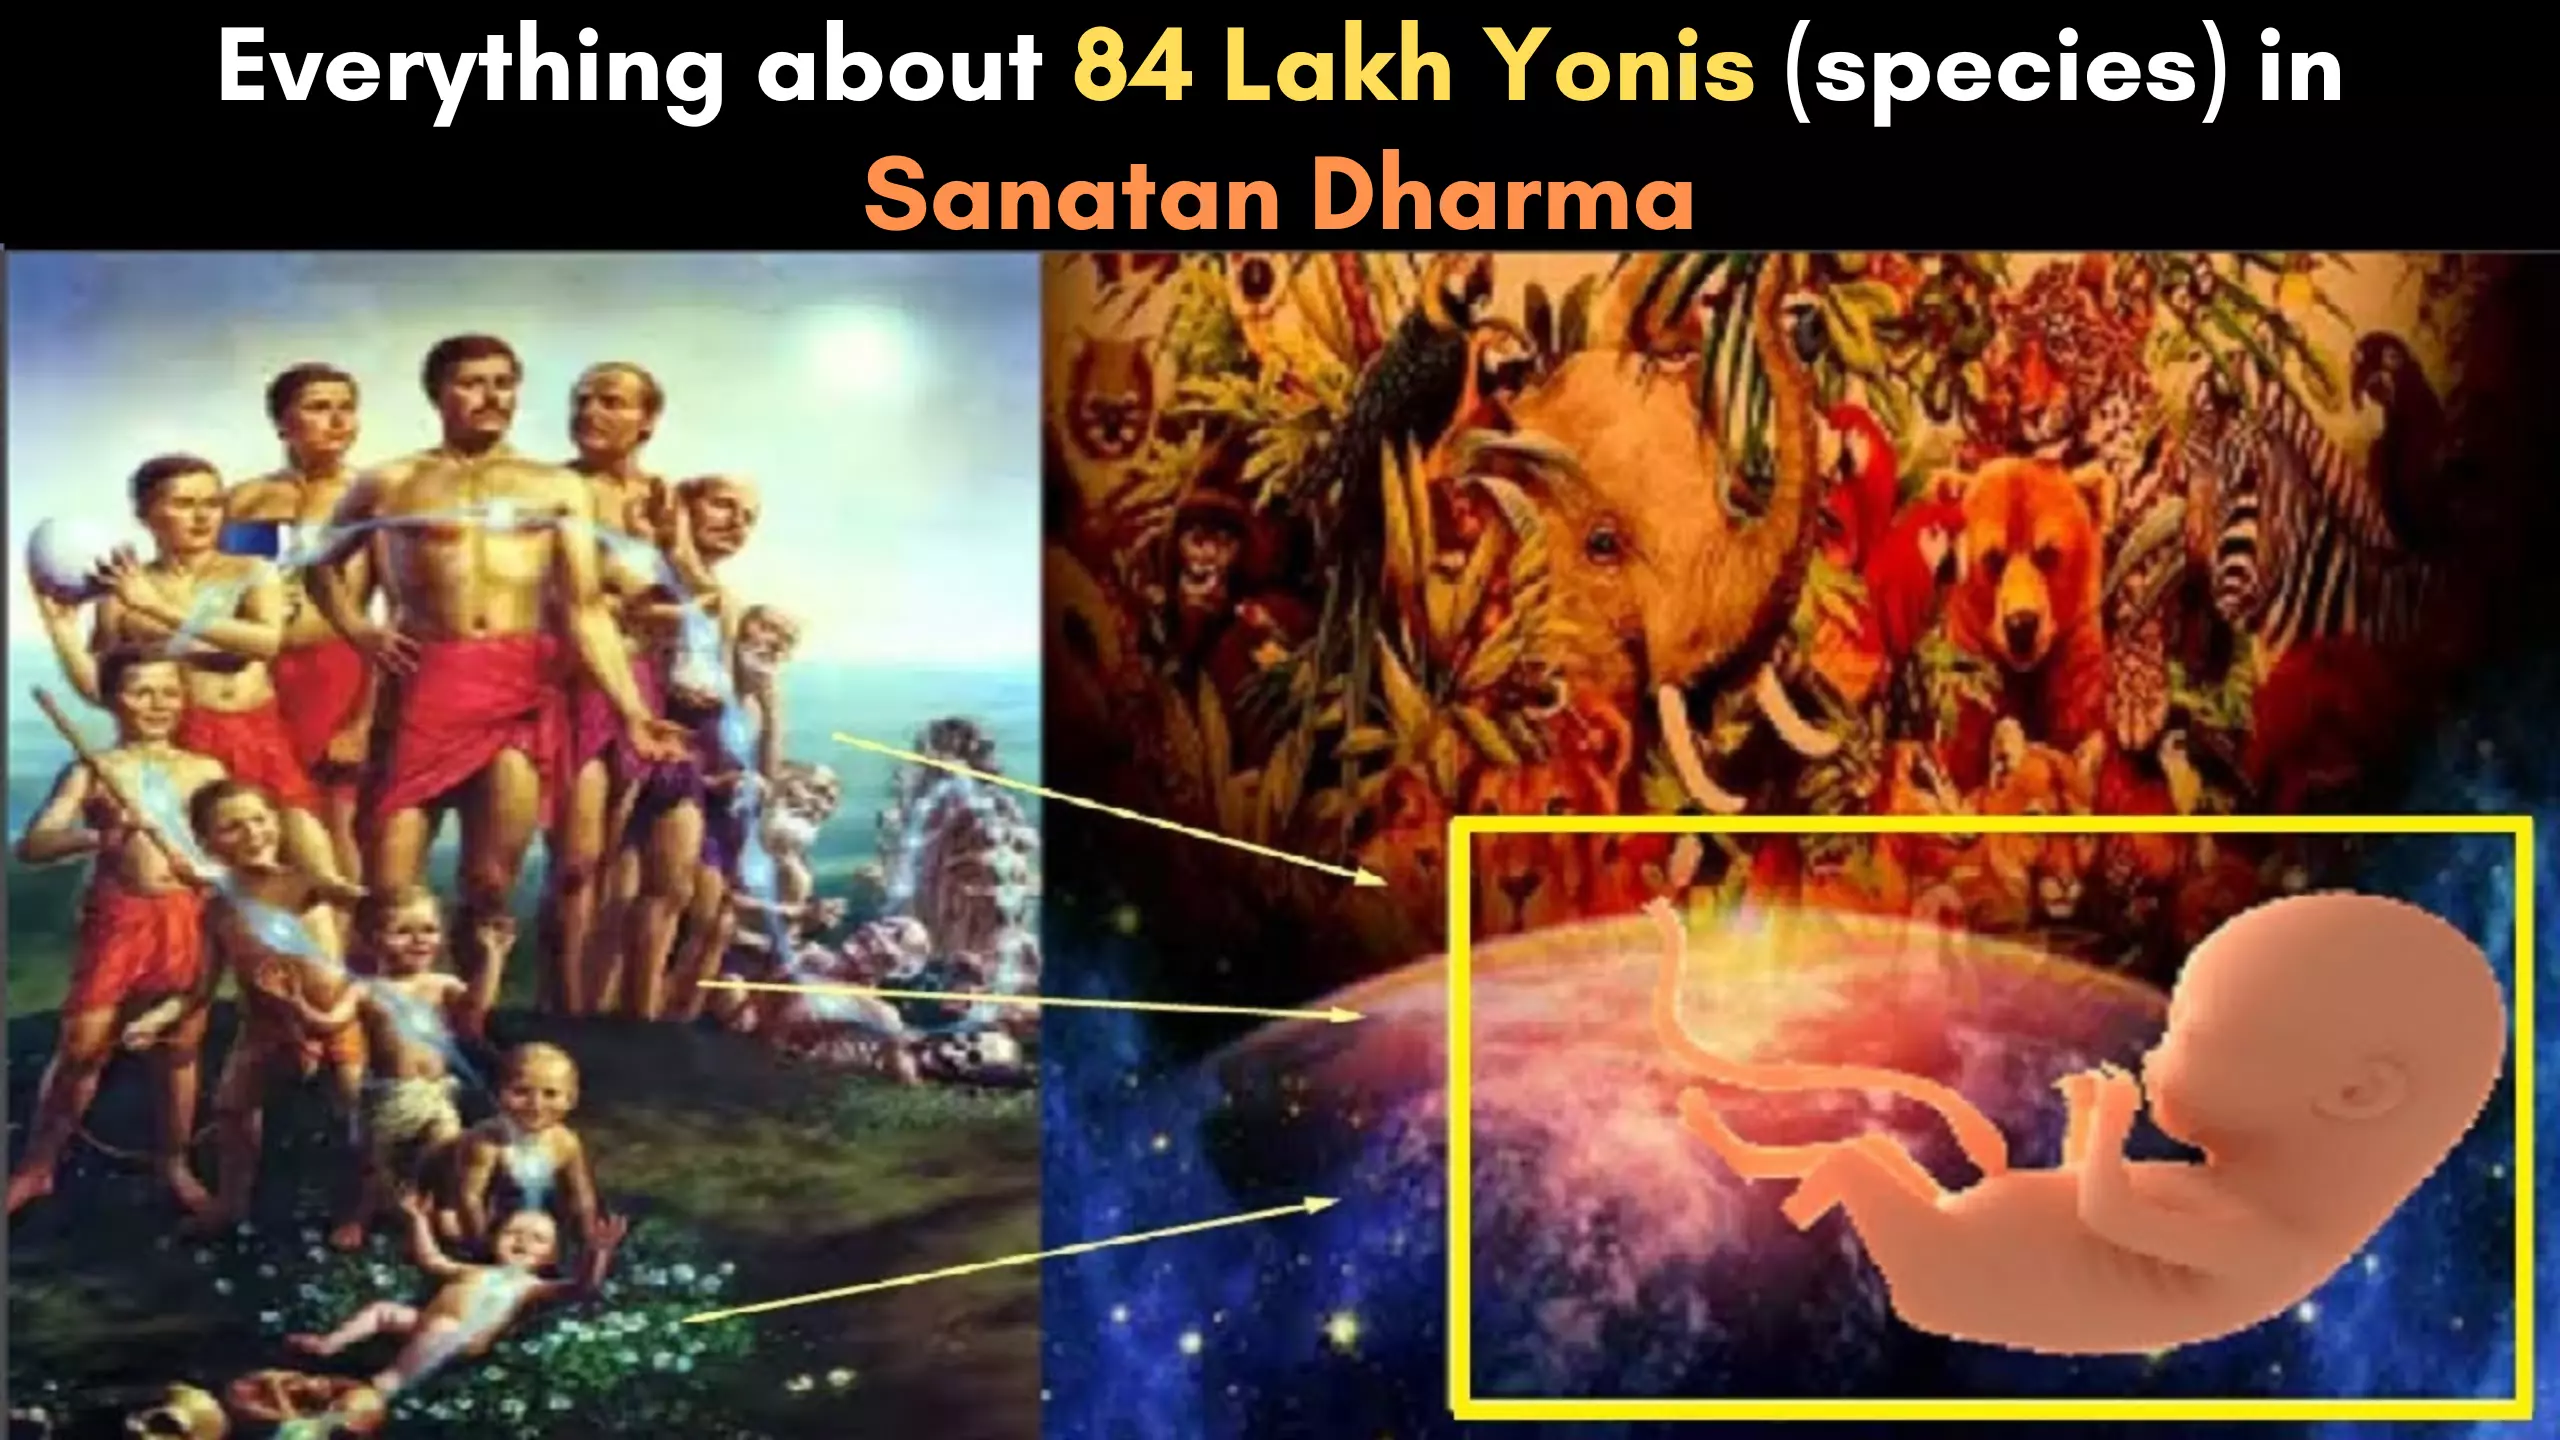 Everything about 84 Lakh Yonis (species) in Sanatan Dharma